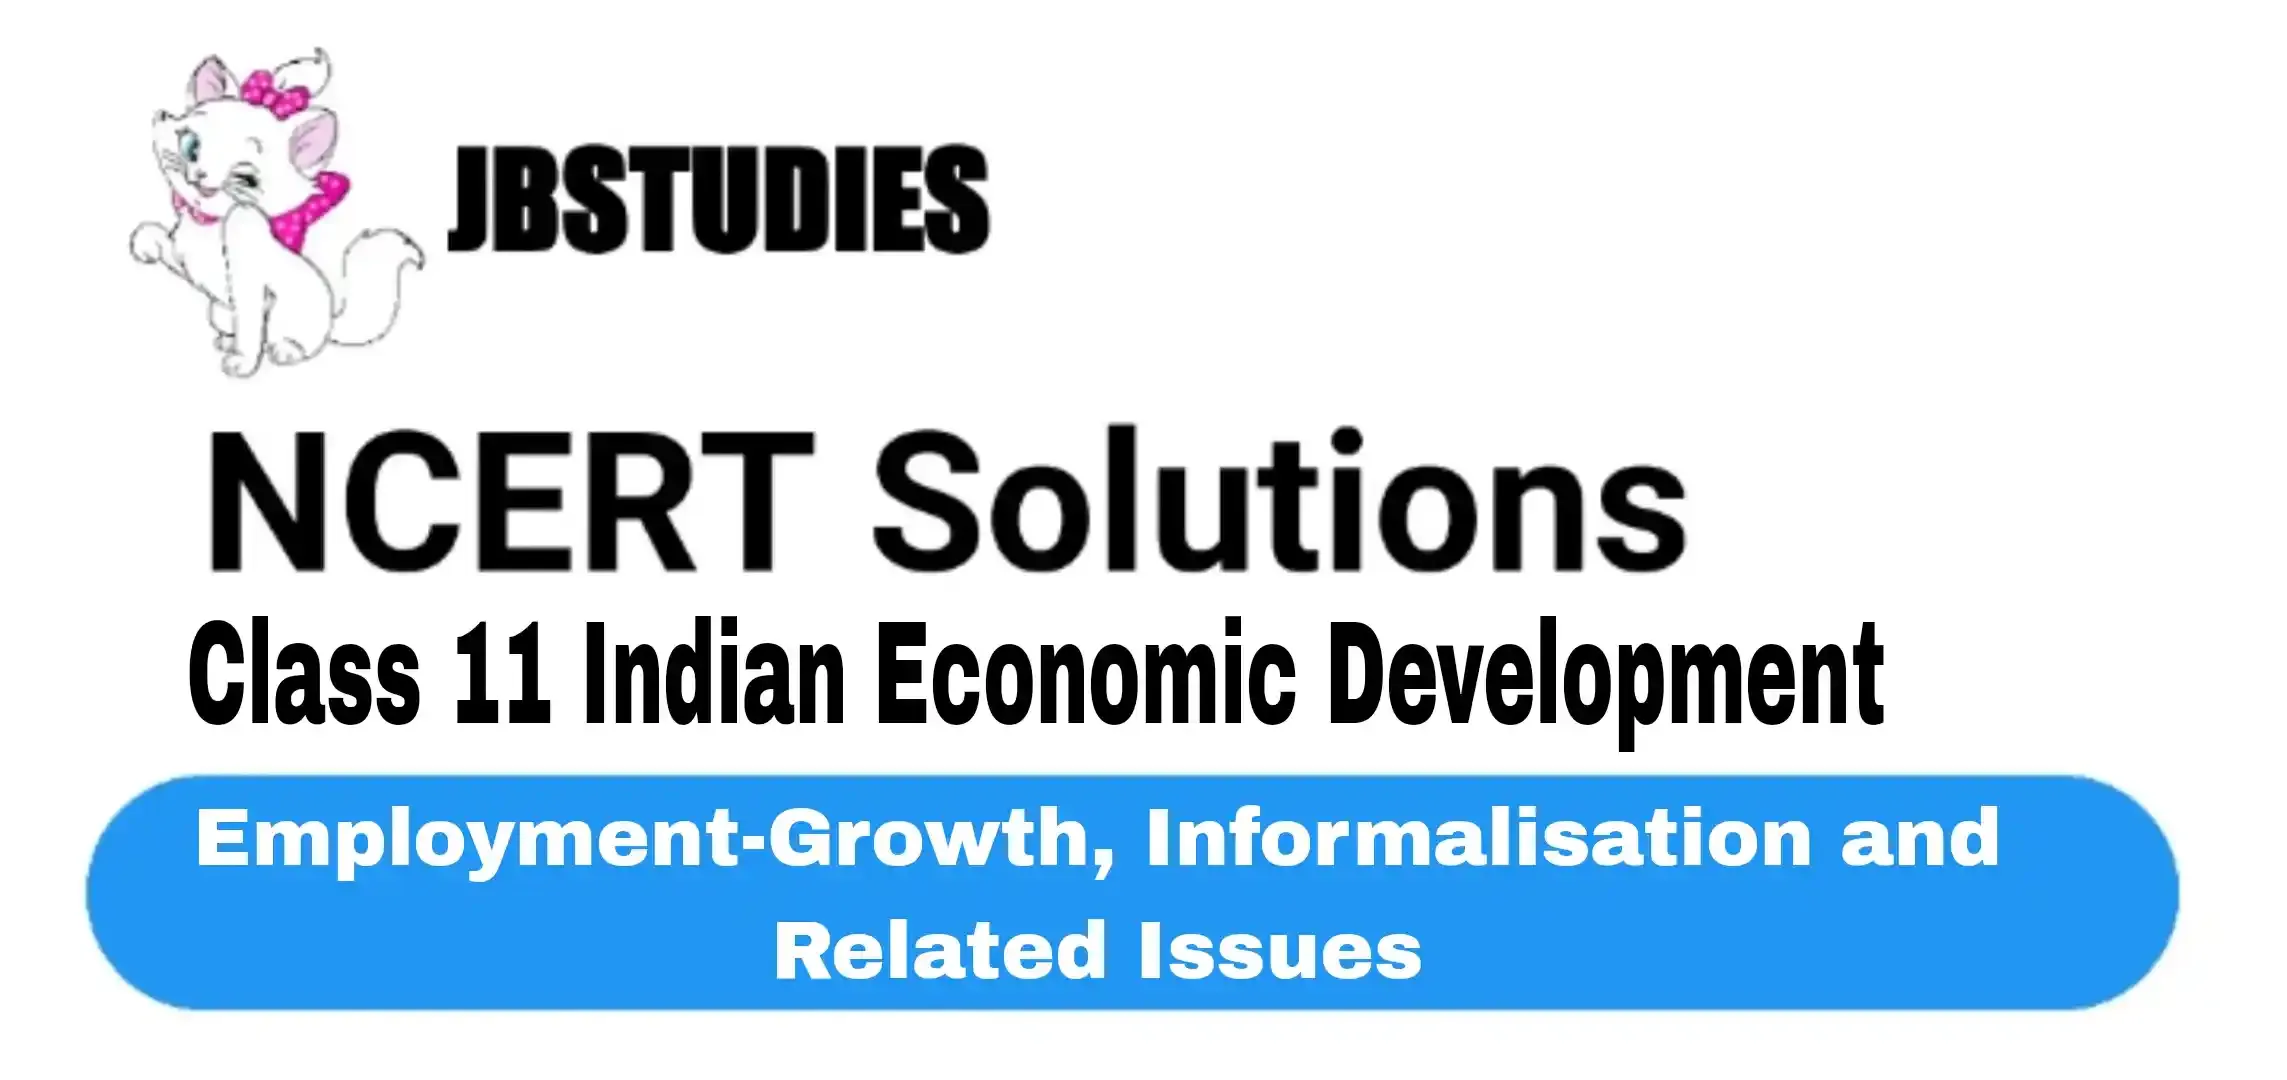 Solutions Class 11 Indian Economic Development Chapter -7 (Employment-Growth, Informalisation and Related Issues)